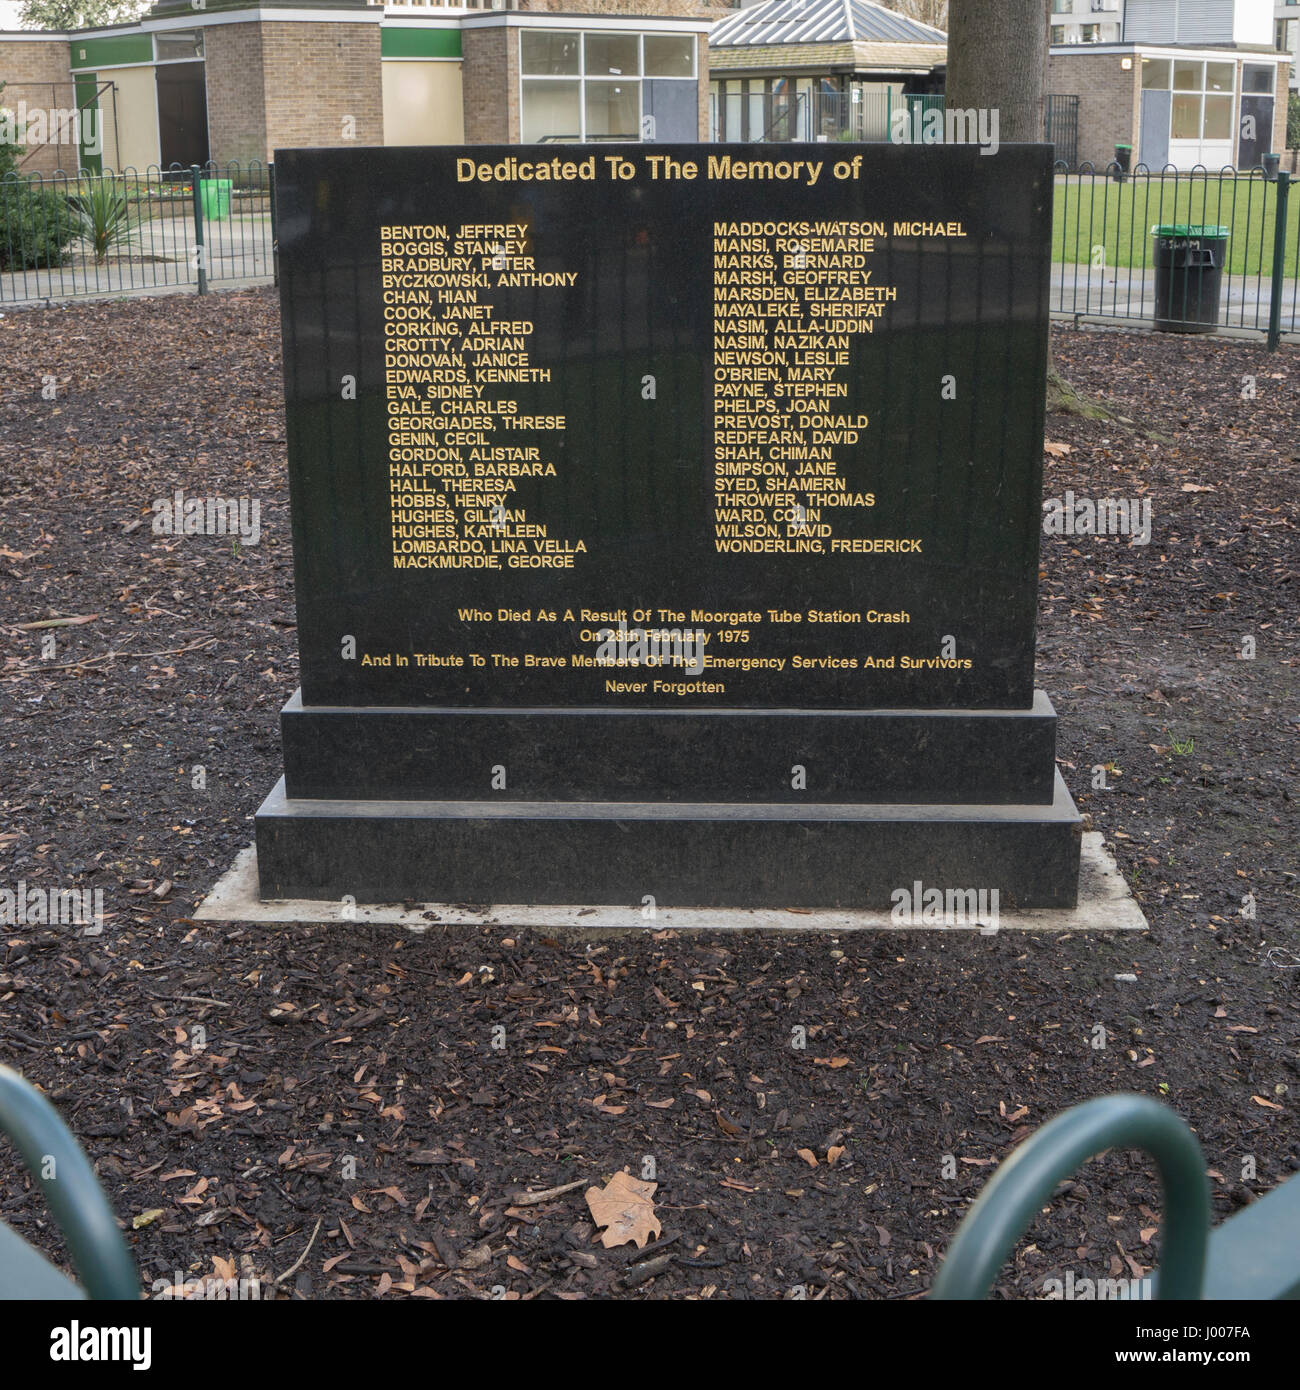 Memorial to the 43 passengers killed in the Moorgate Underground train accident in 28 February 1975, greatest loss of life in peacetime London. Stock Photo